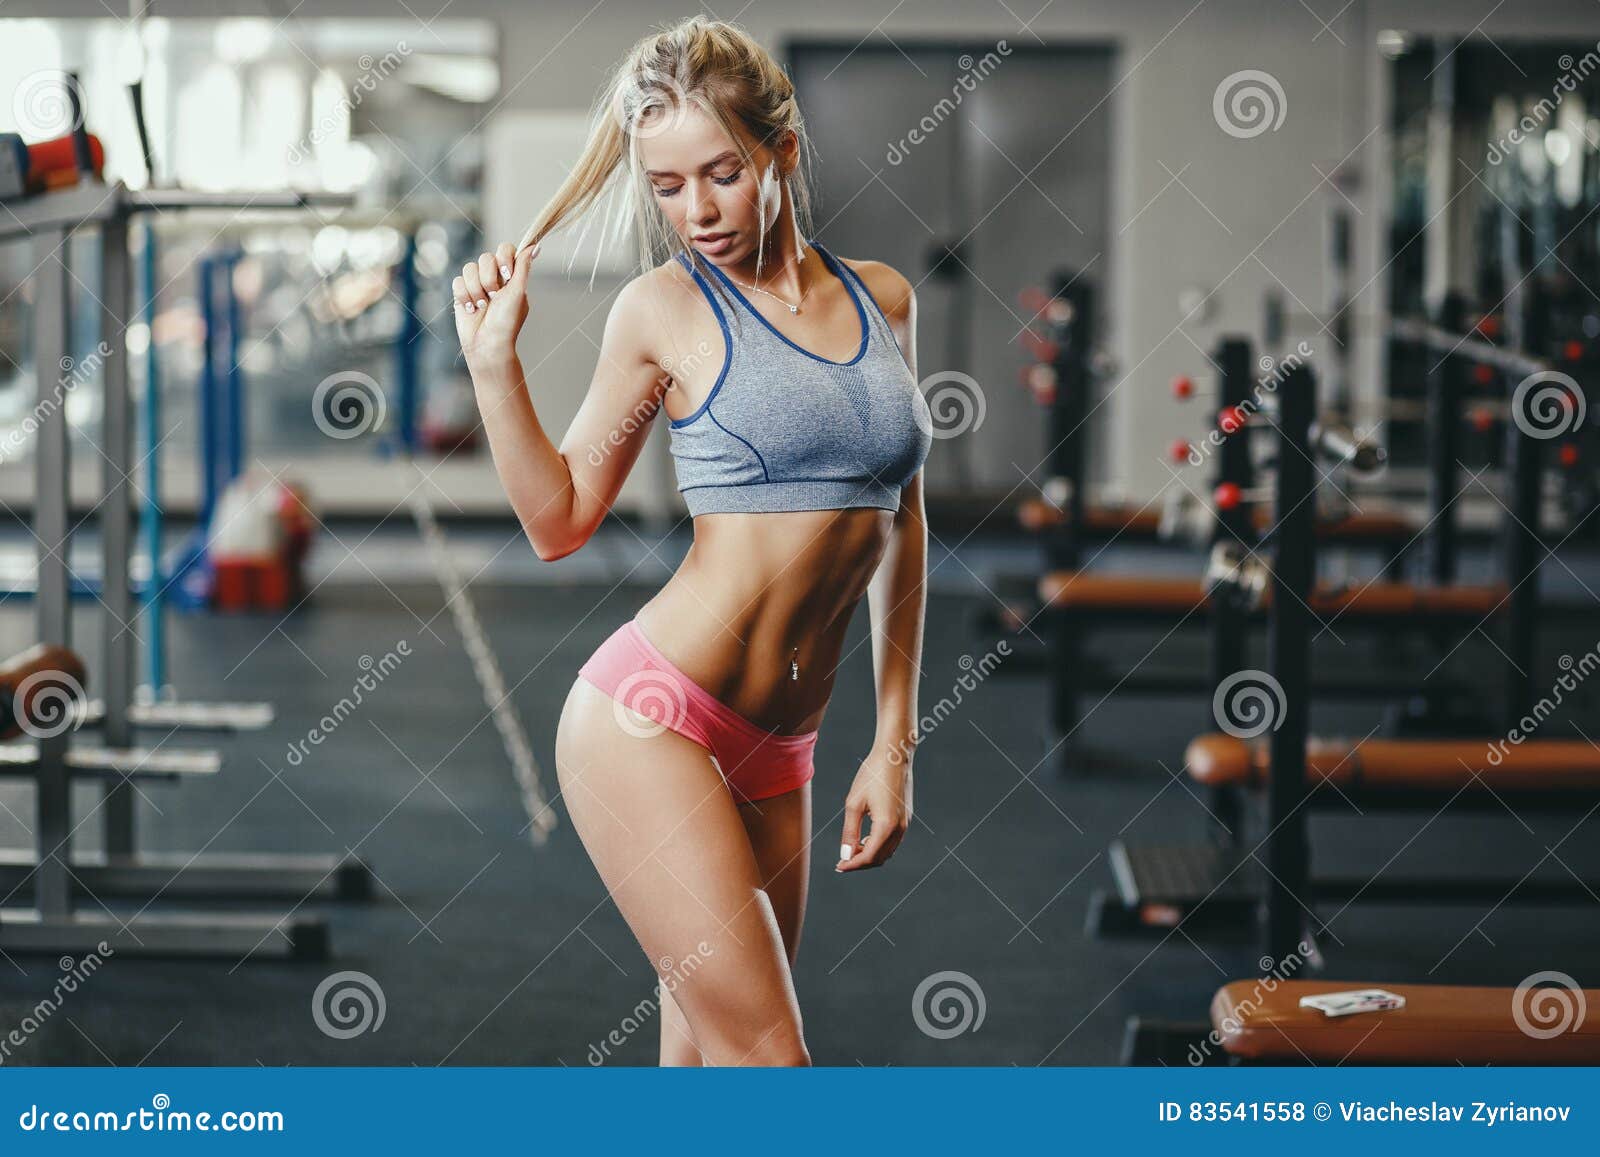 Fitness Photoshoot Poses for Athletes